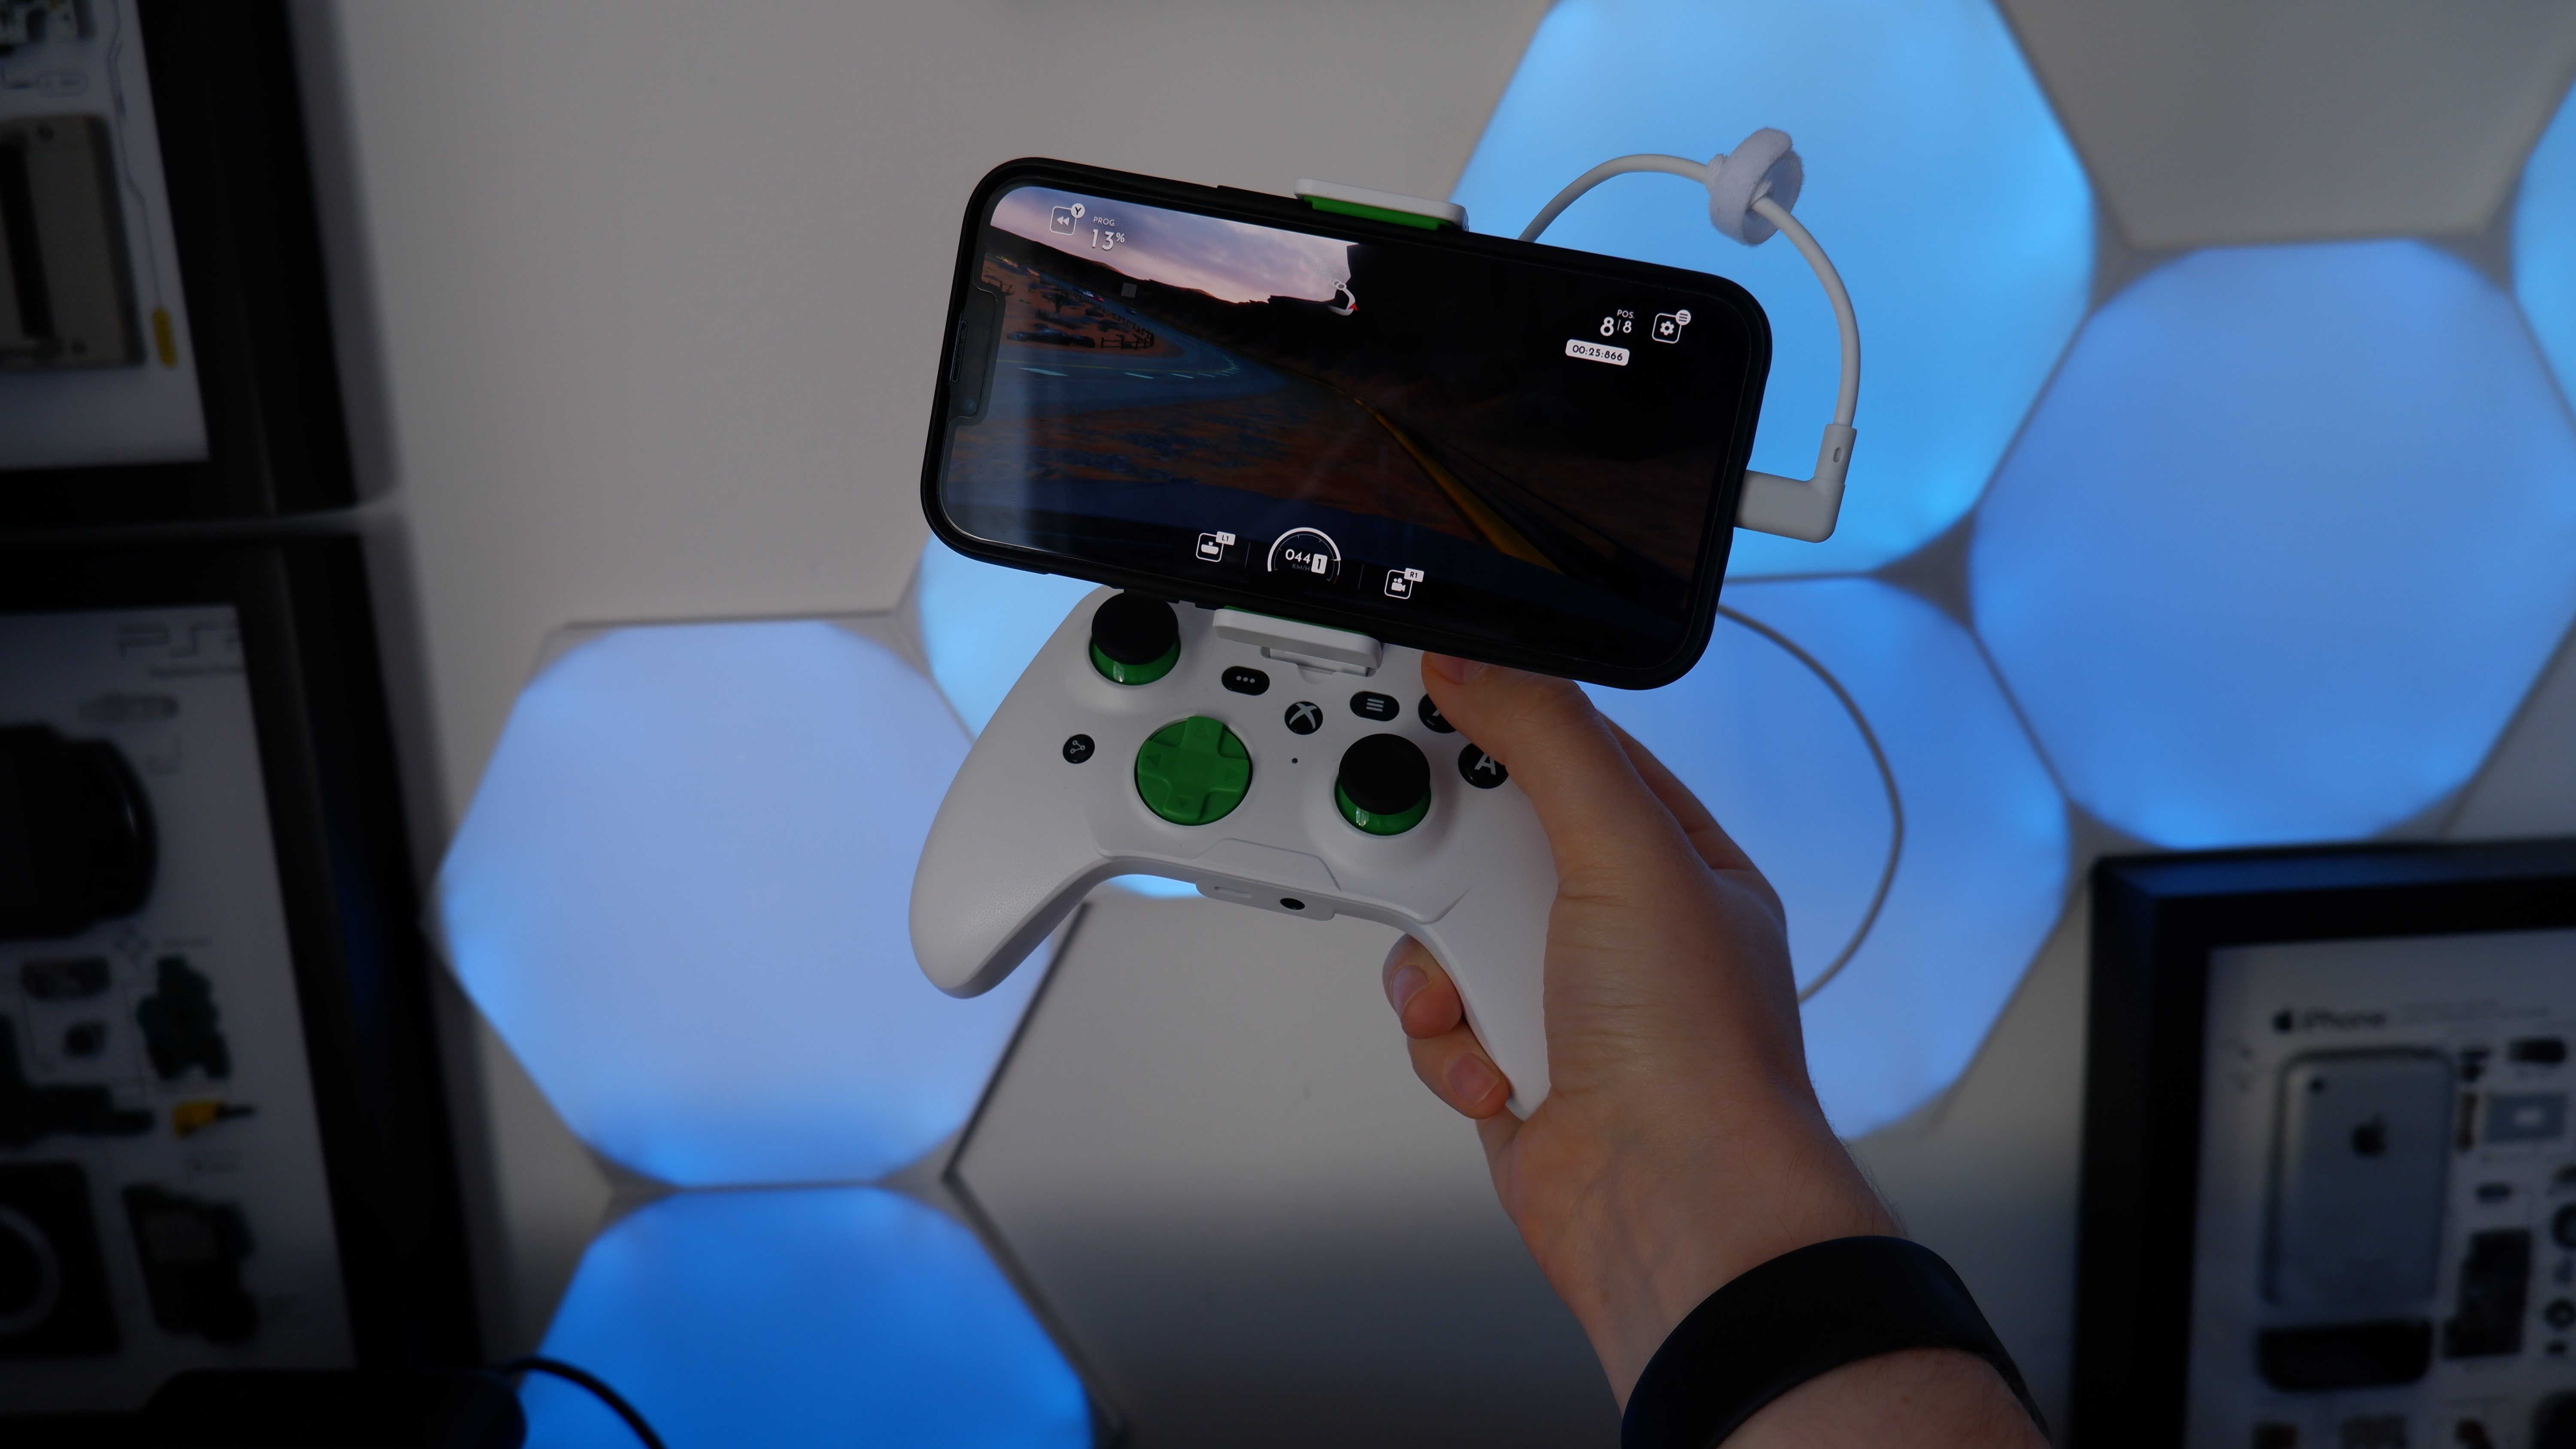 RiotPWR Xbox Cloud Gaming Controller for iOS review: Wires for the